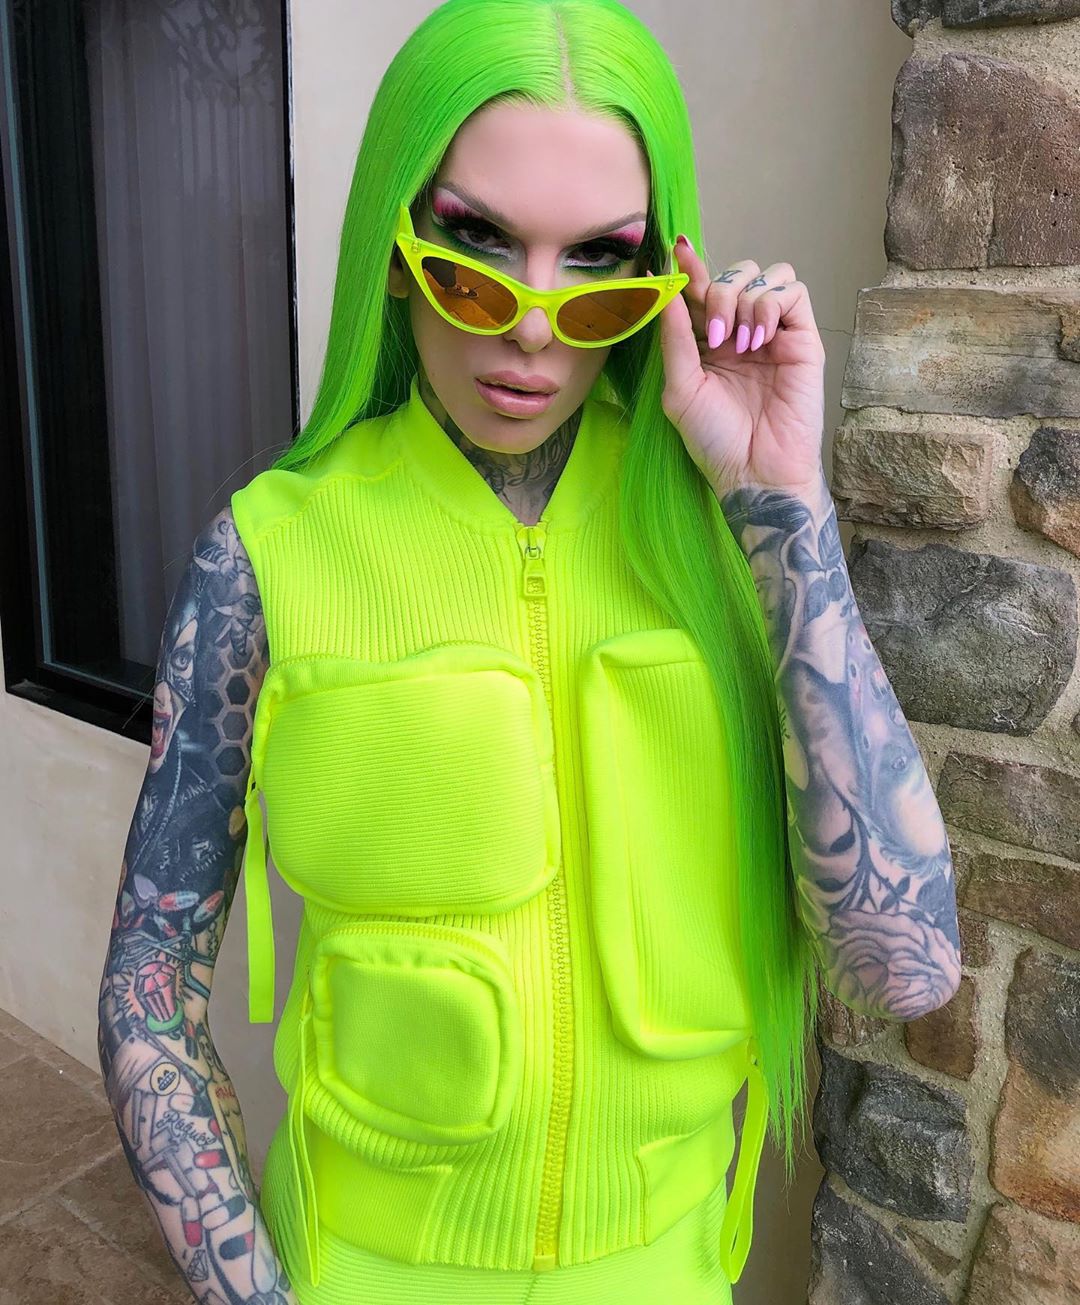 Jeffree star with his Louis Vuitton - 𝘼𝙚𝙨𝙩𝙝𝙚𝙩𝙞𝙘 𝙝𝙤𝙚